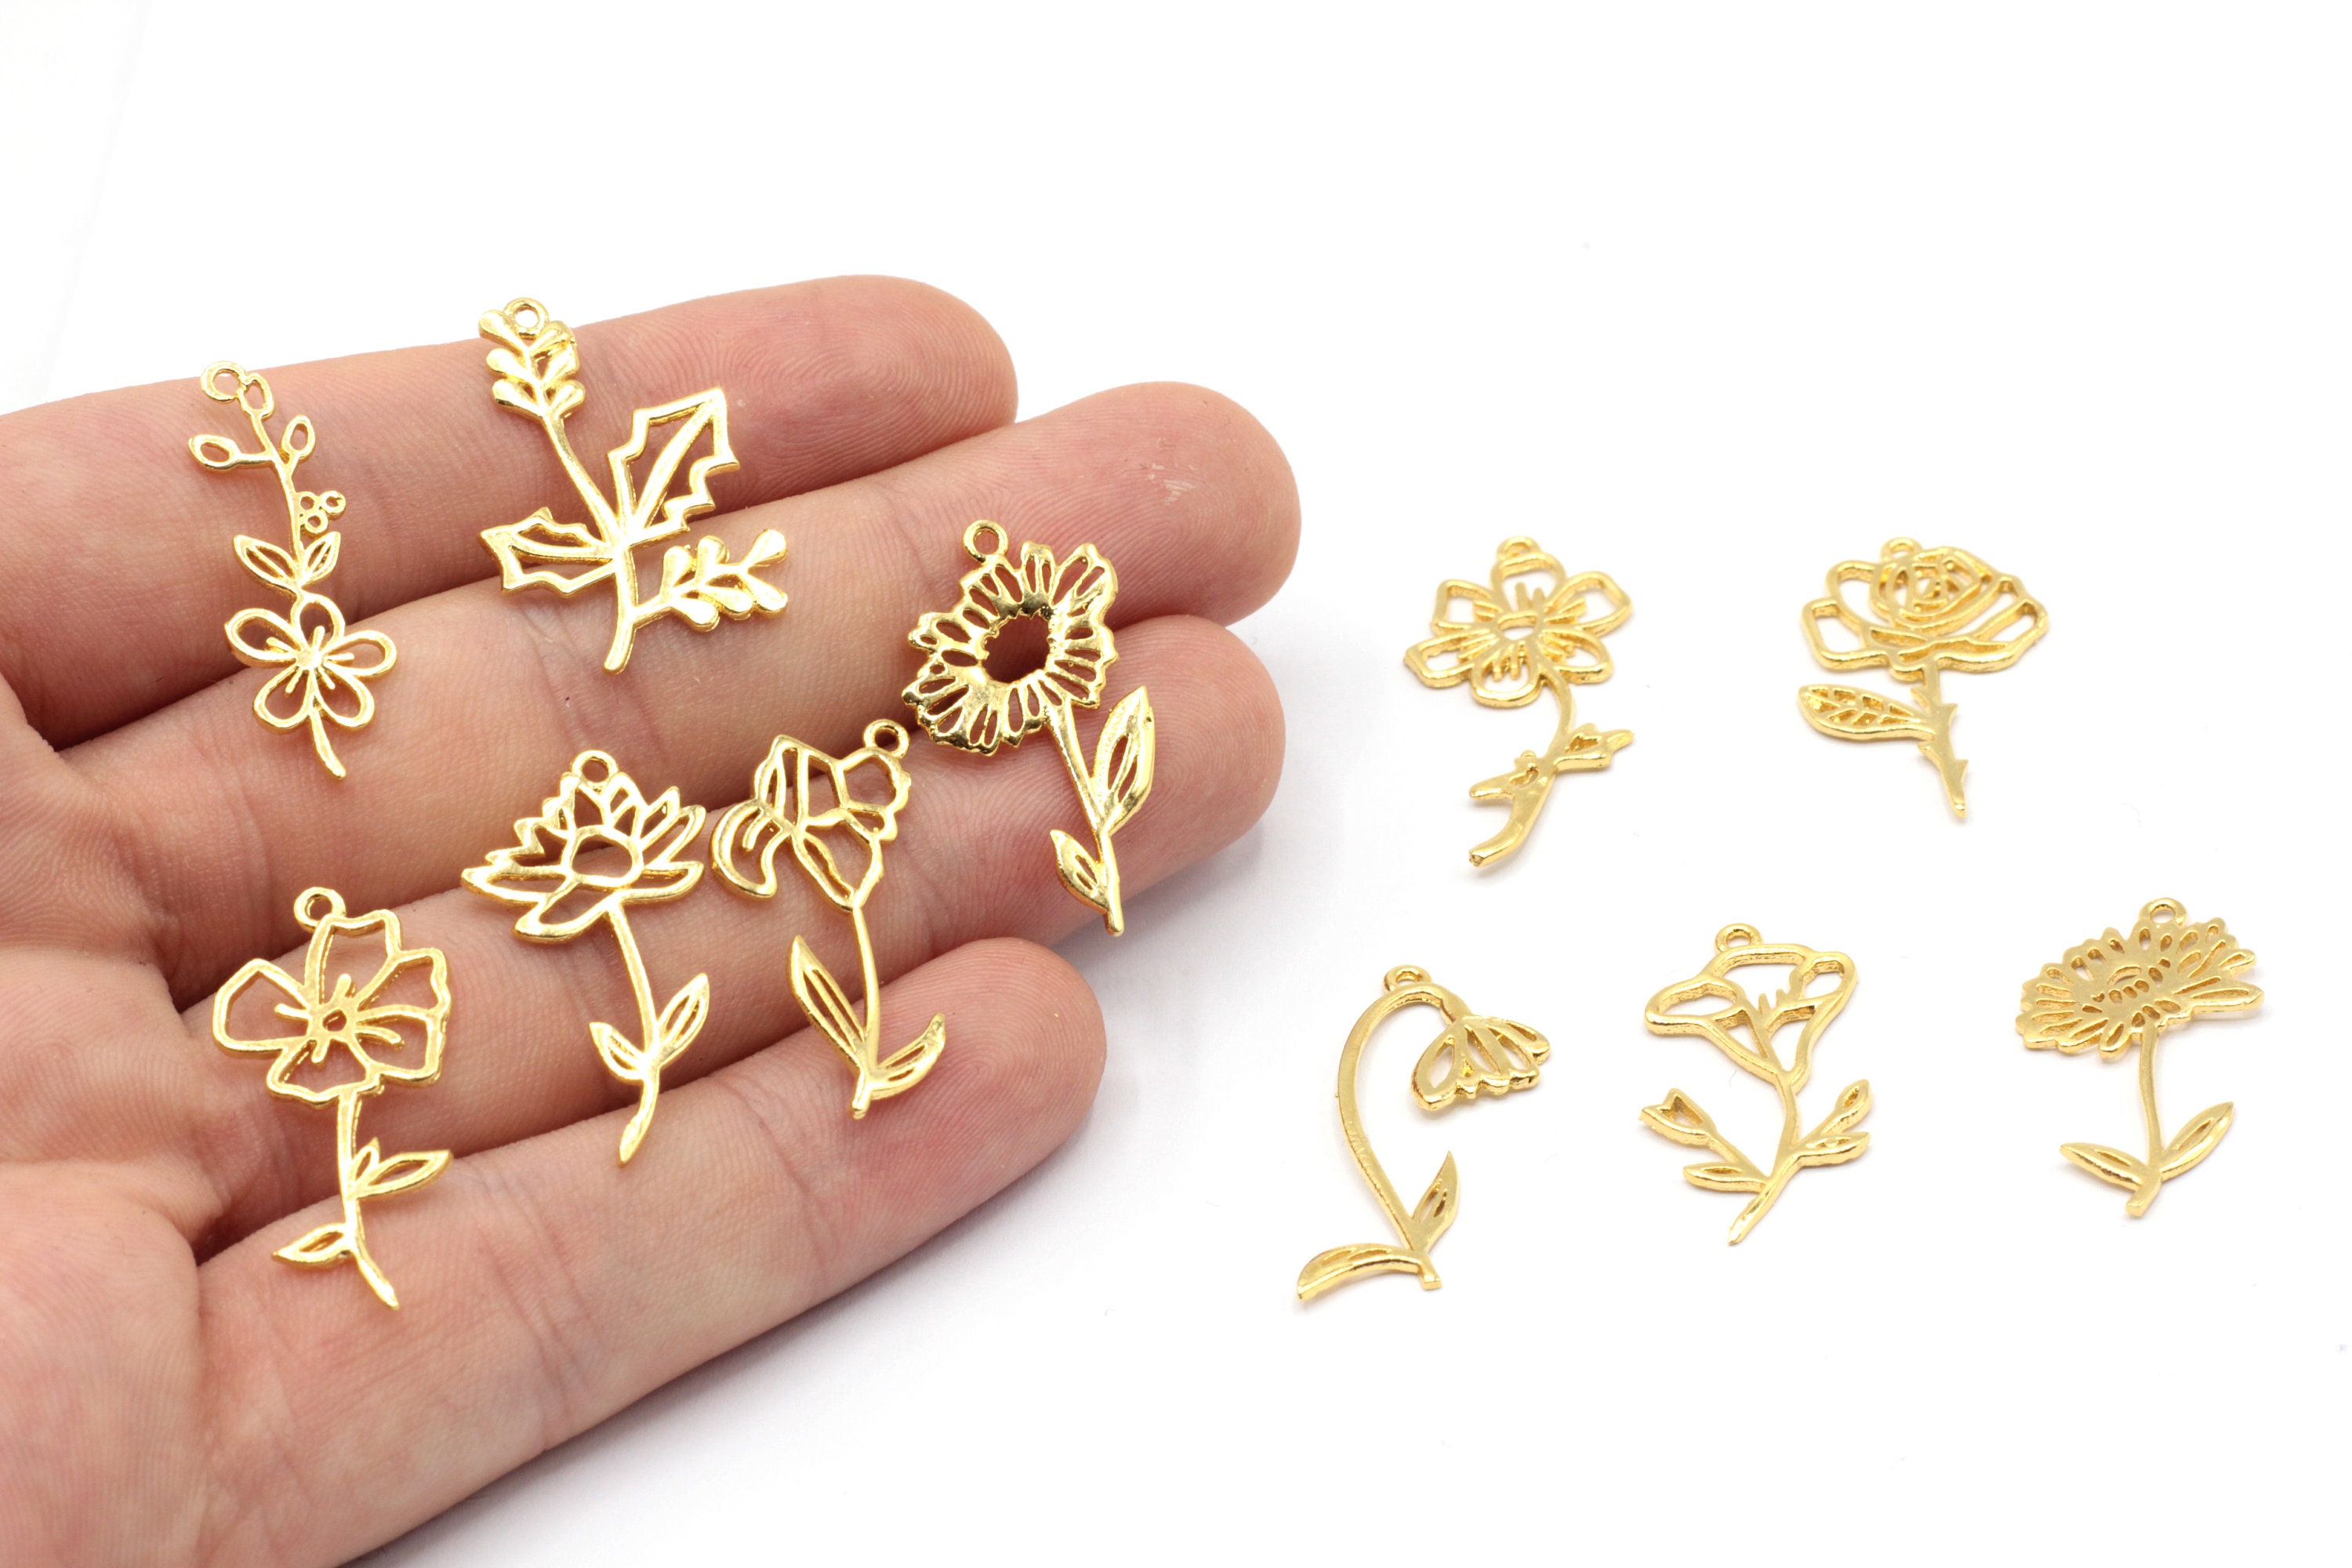 .com: DROLE 18K Gold Tone Plated Earring Charms Stainless Steel  Jewelry Making Charms for Earring Necklace Making DIY Crafting 28Pcs (14  Pairs)